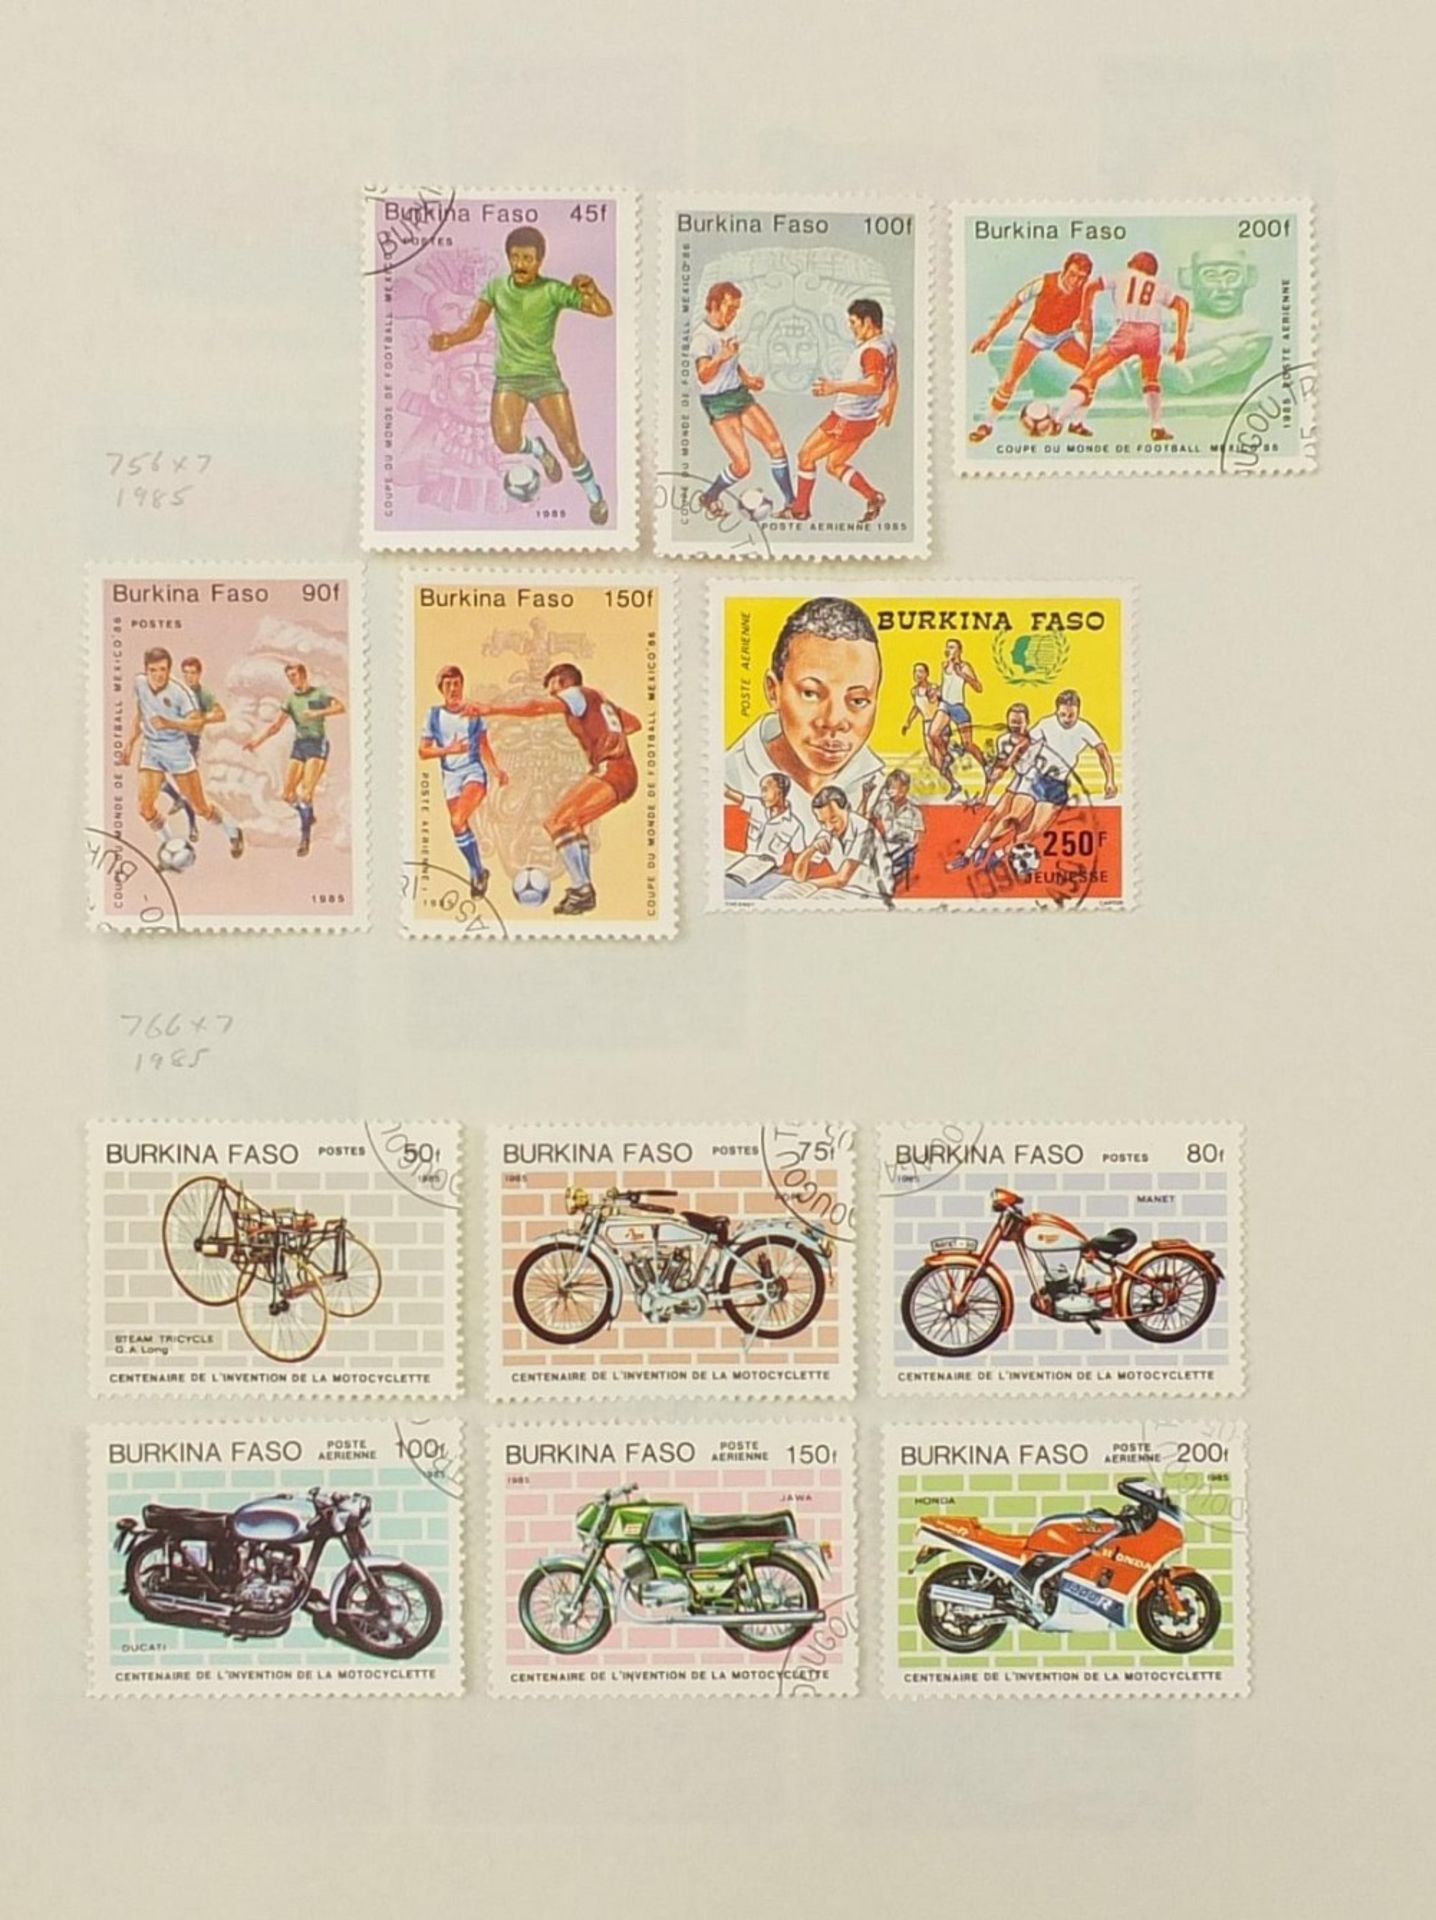 Extensive collection of antique and later world stamps arranged in albums including Brazil, - Image 26 of 52